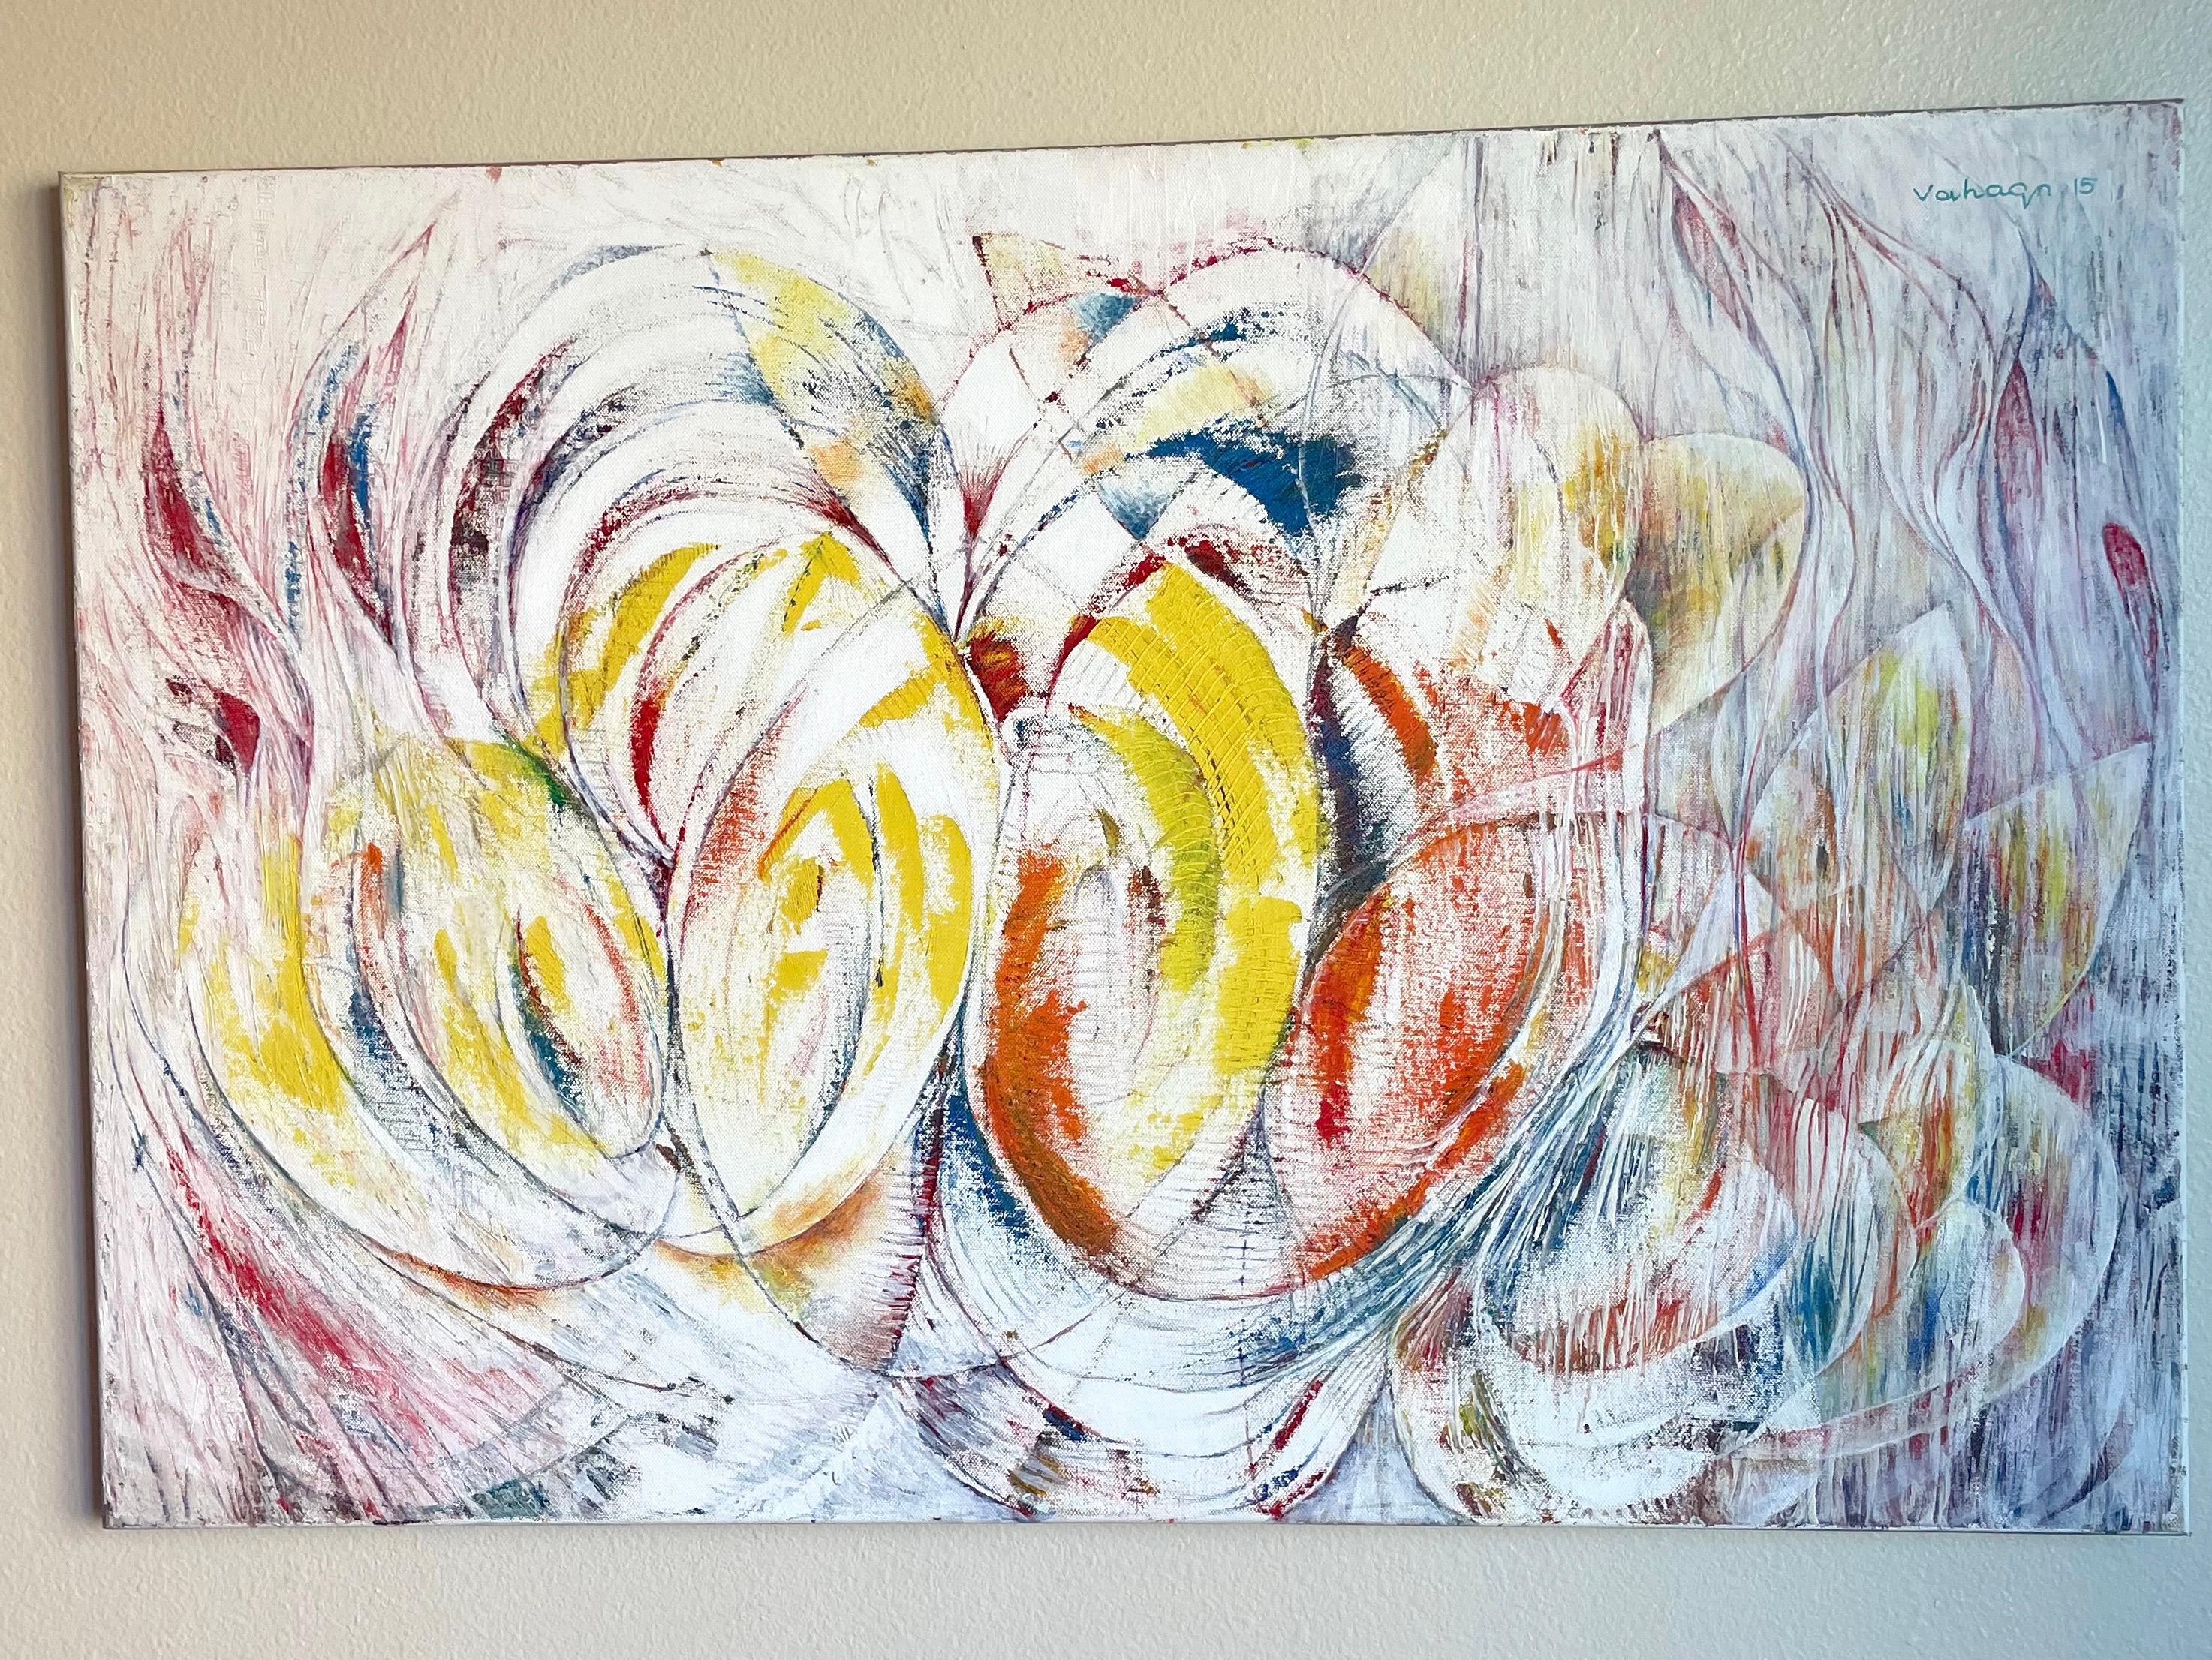 Artist: Vahagn Ghaltaghchyan
Work: Original oil painting, handmade artwork, one of a kind 
Medium: Oil on Canvas
Style: Abstract Art
Year: 2023
Title: Fruit of Life
Size: 24